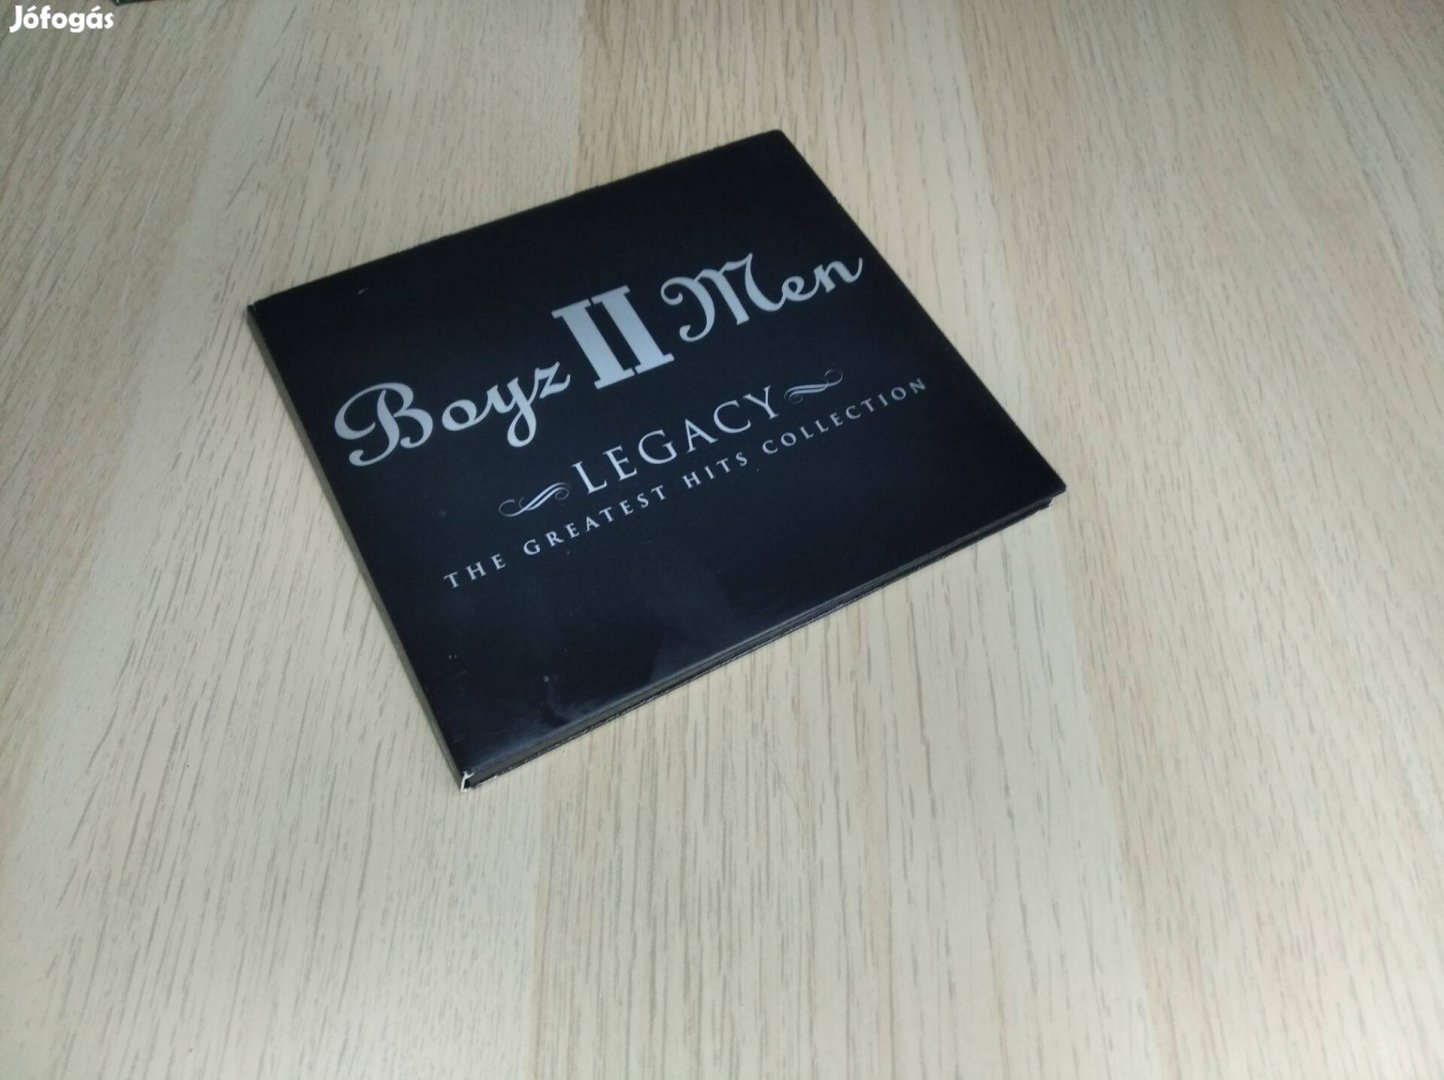 Boyz II Men - Legacy - The Greatest Hits Collection / CD